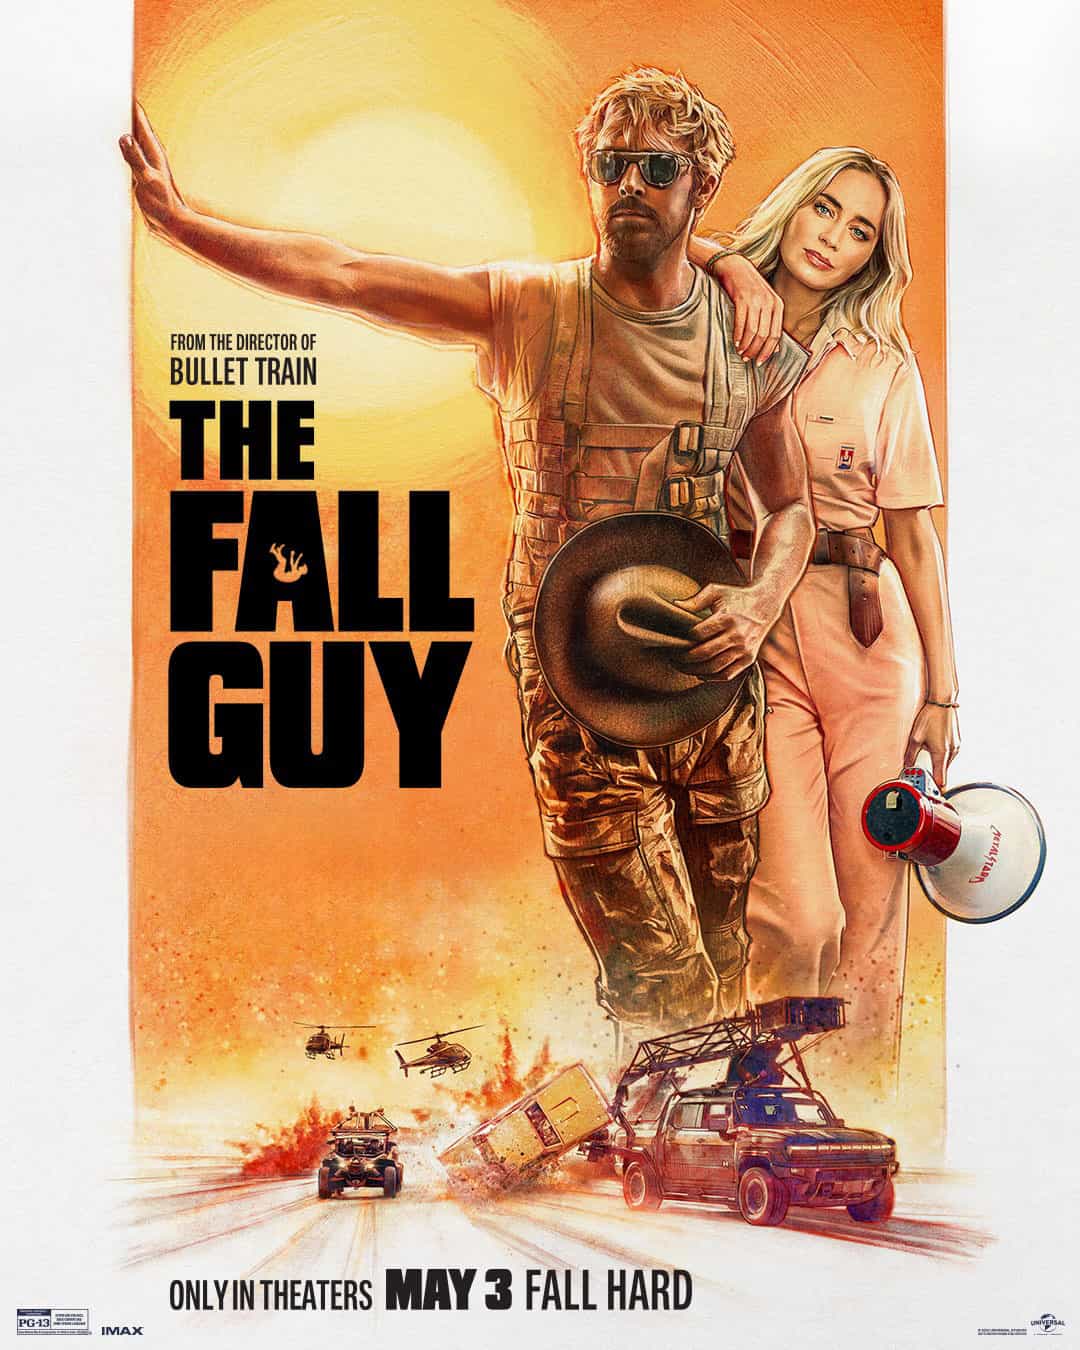 Check out the new trailer and poster for upcoming movie The Fall Guy which stars Emily Blunt and Ryan Gosling - movie UK release date 1st March 2024 #thefallguy